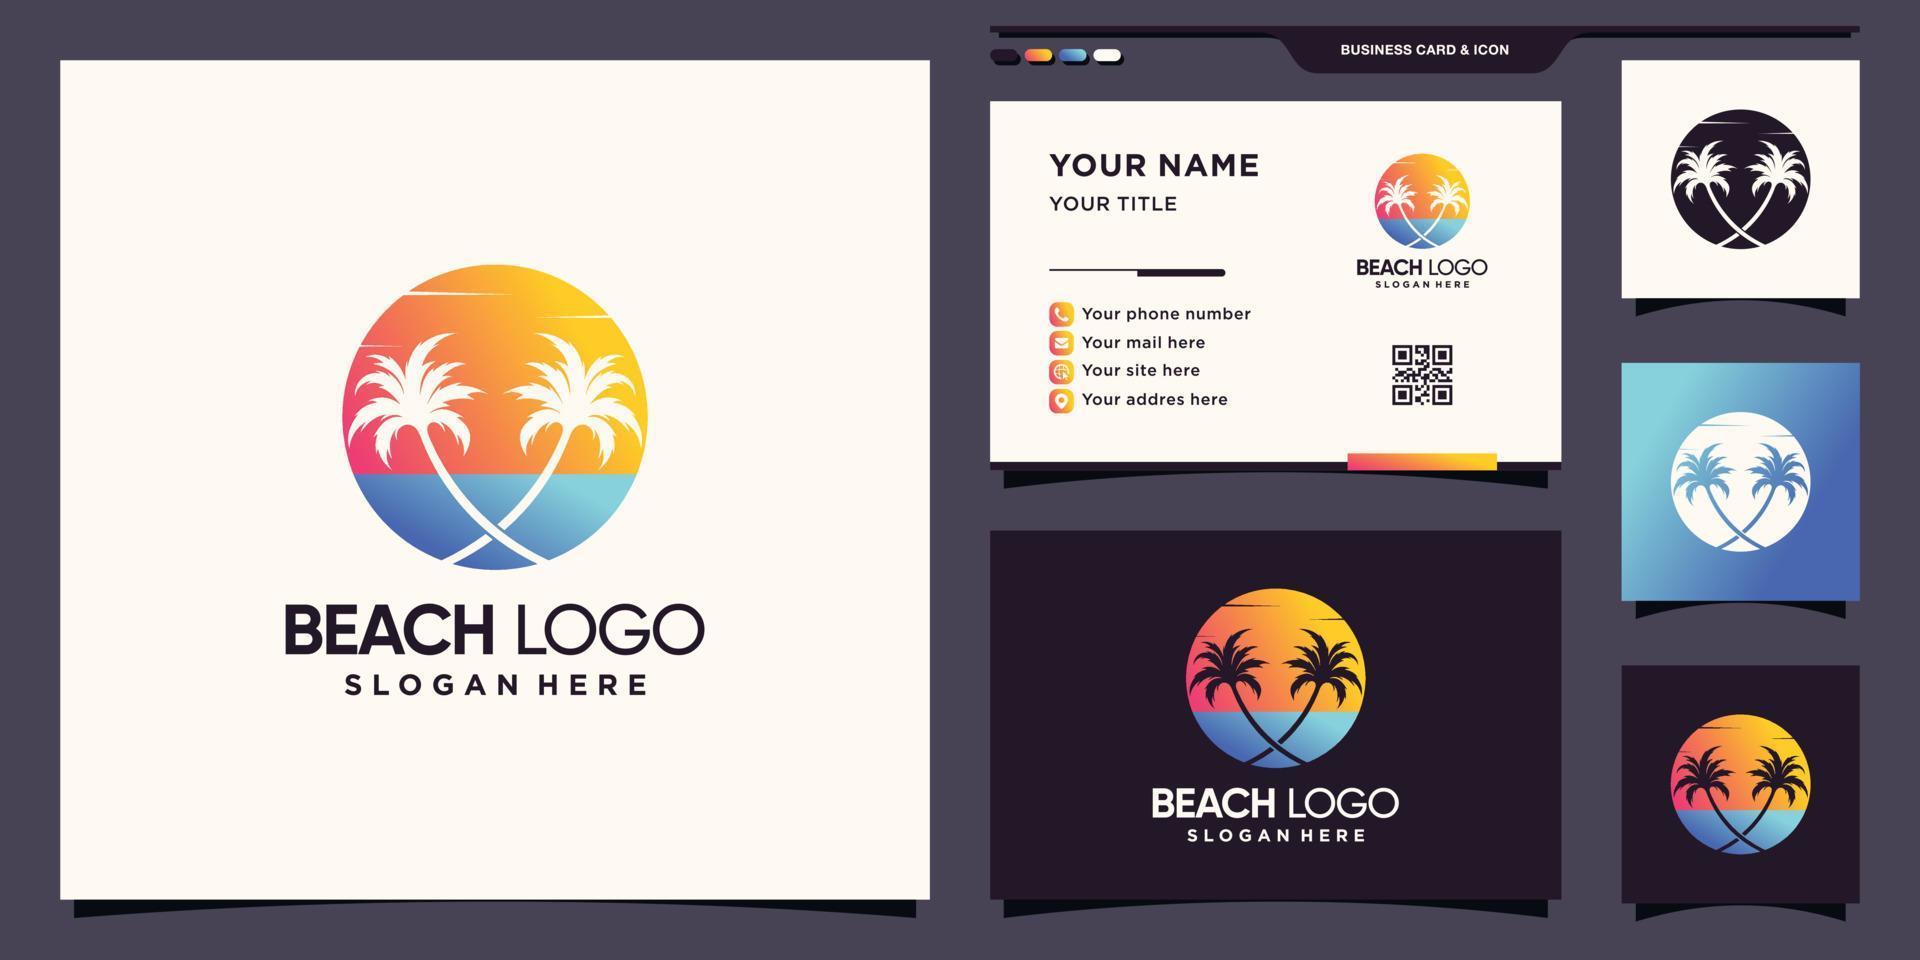 Beach logo with sun and palm tree. icon logo and business card design Premium Vector